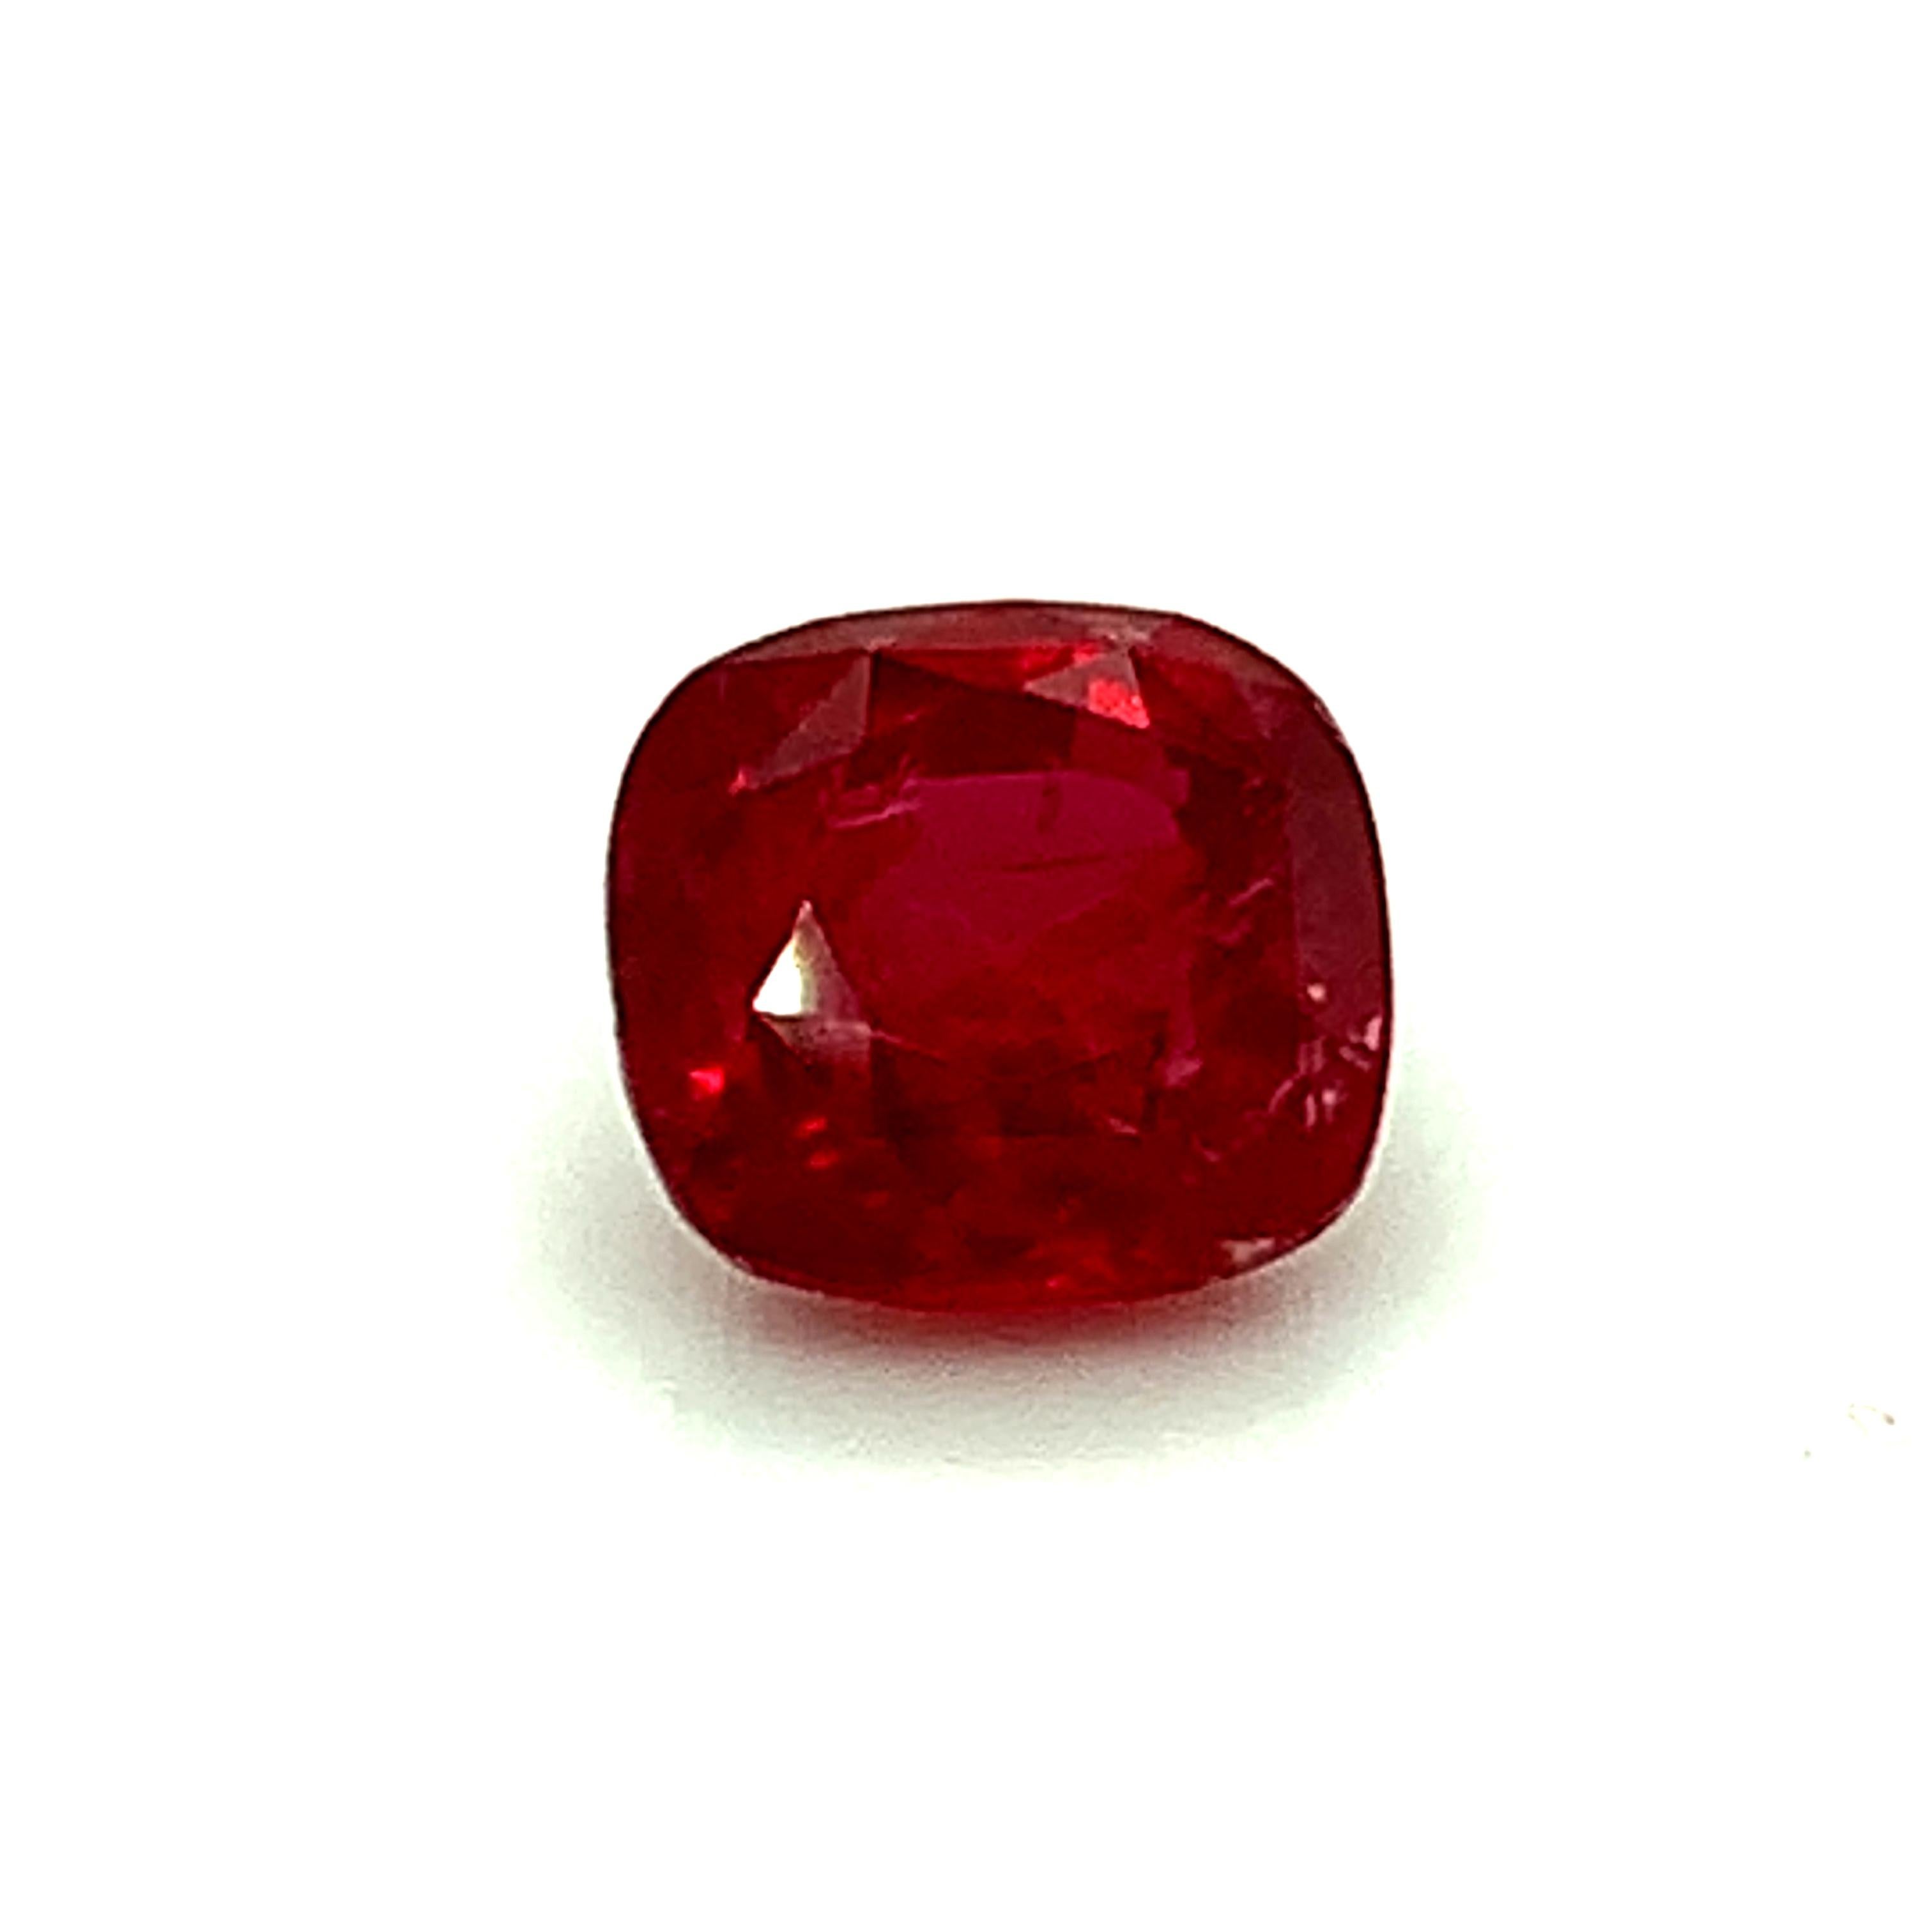 Unheated 3.53 Carat “Pigeon’s Blood” Ruby, GIA Certified 5